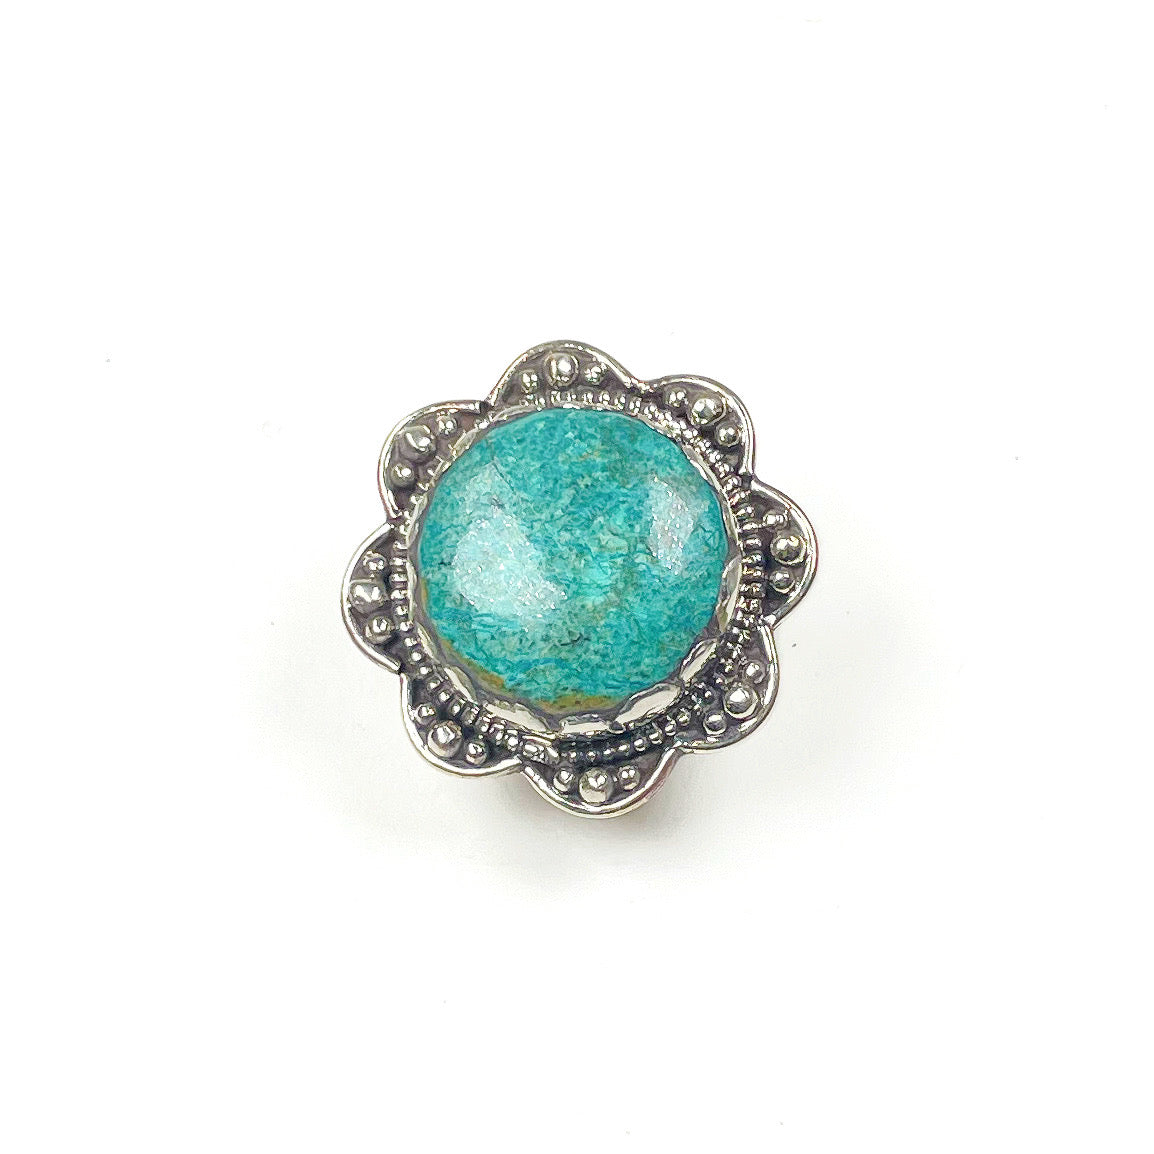 Teal colored chrysocolla stone  ring with silver metal scalloped edge.